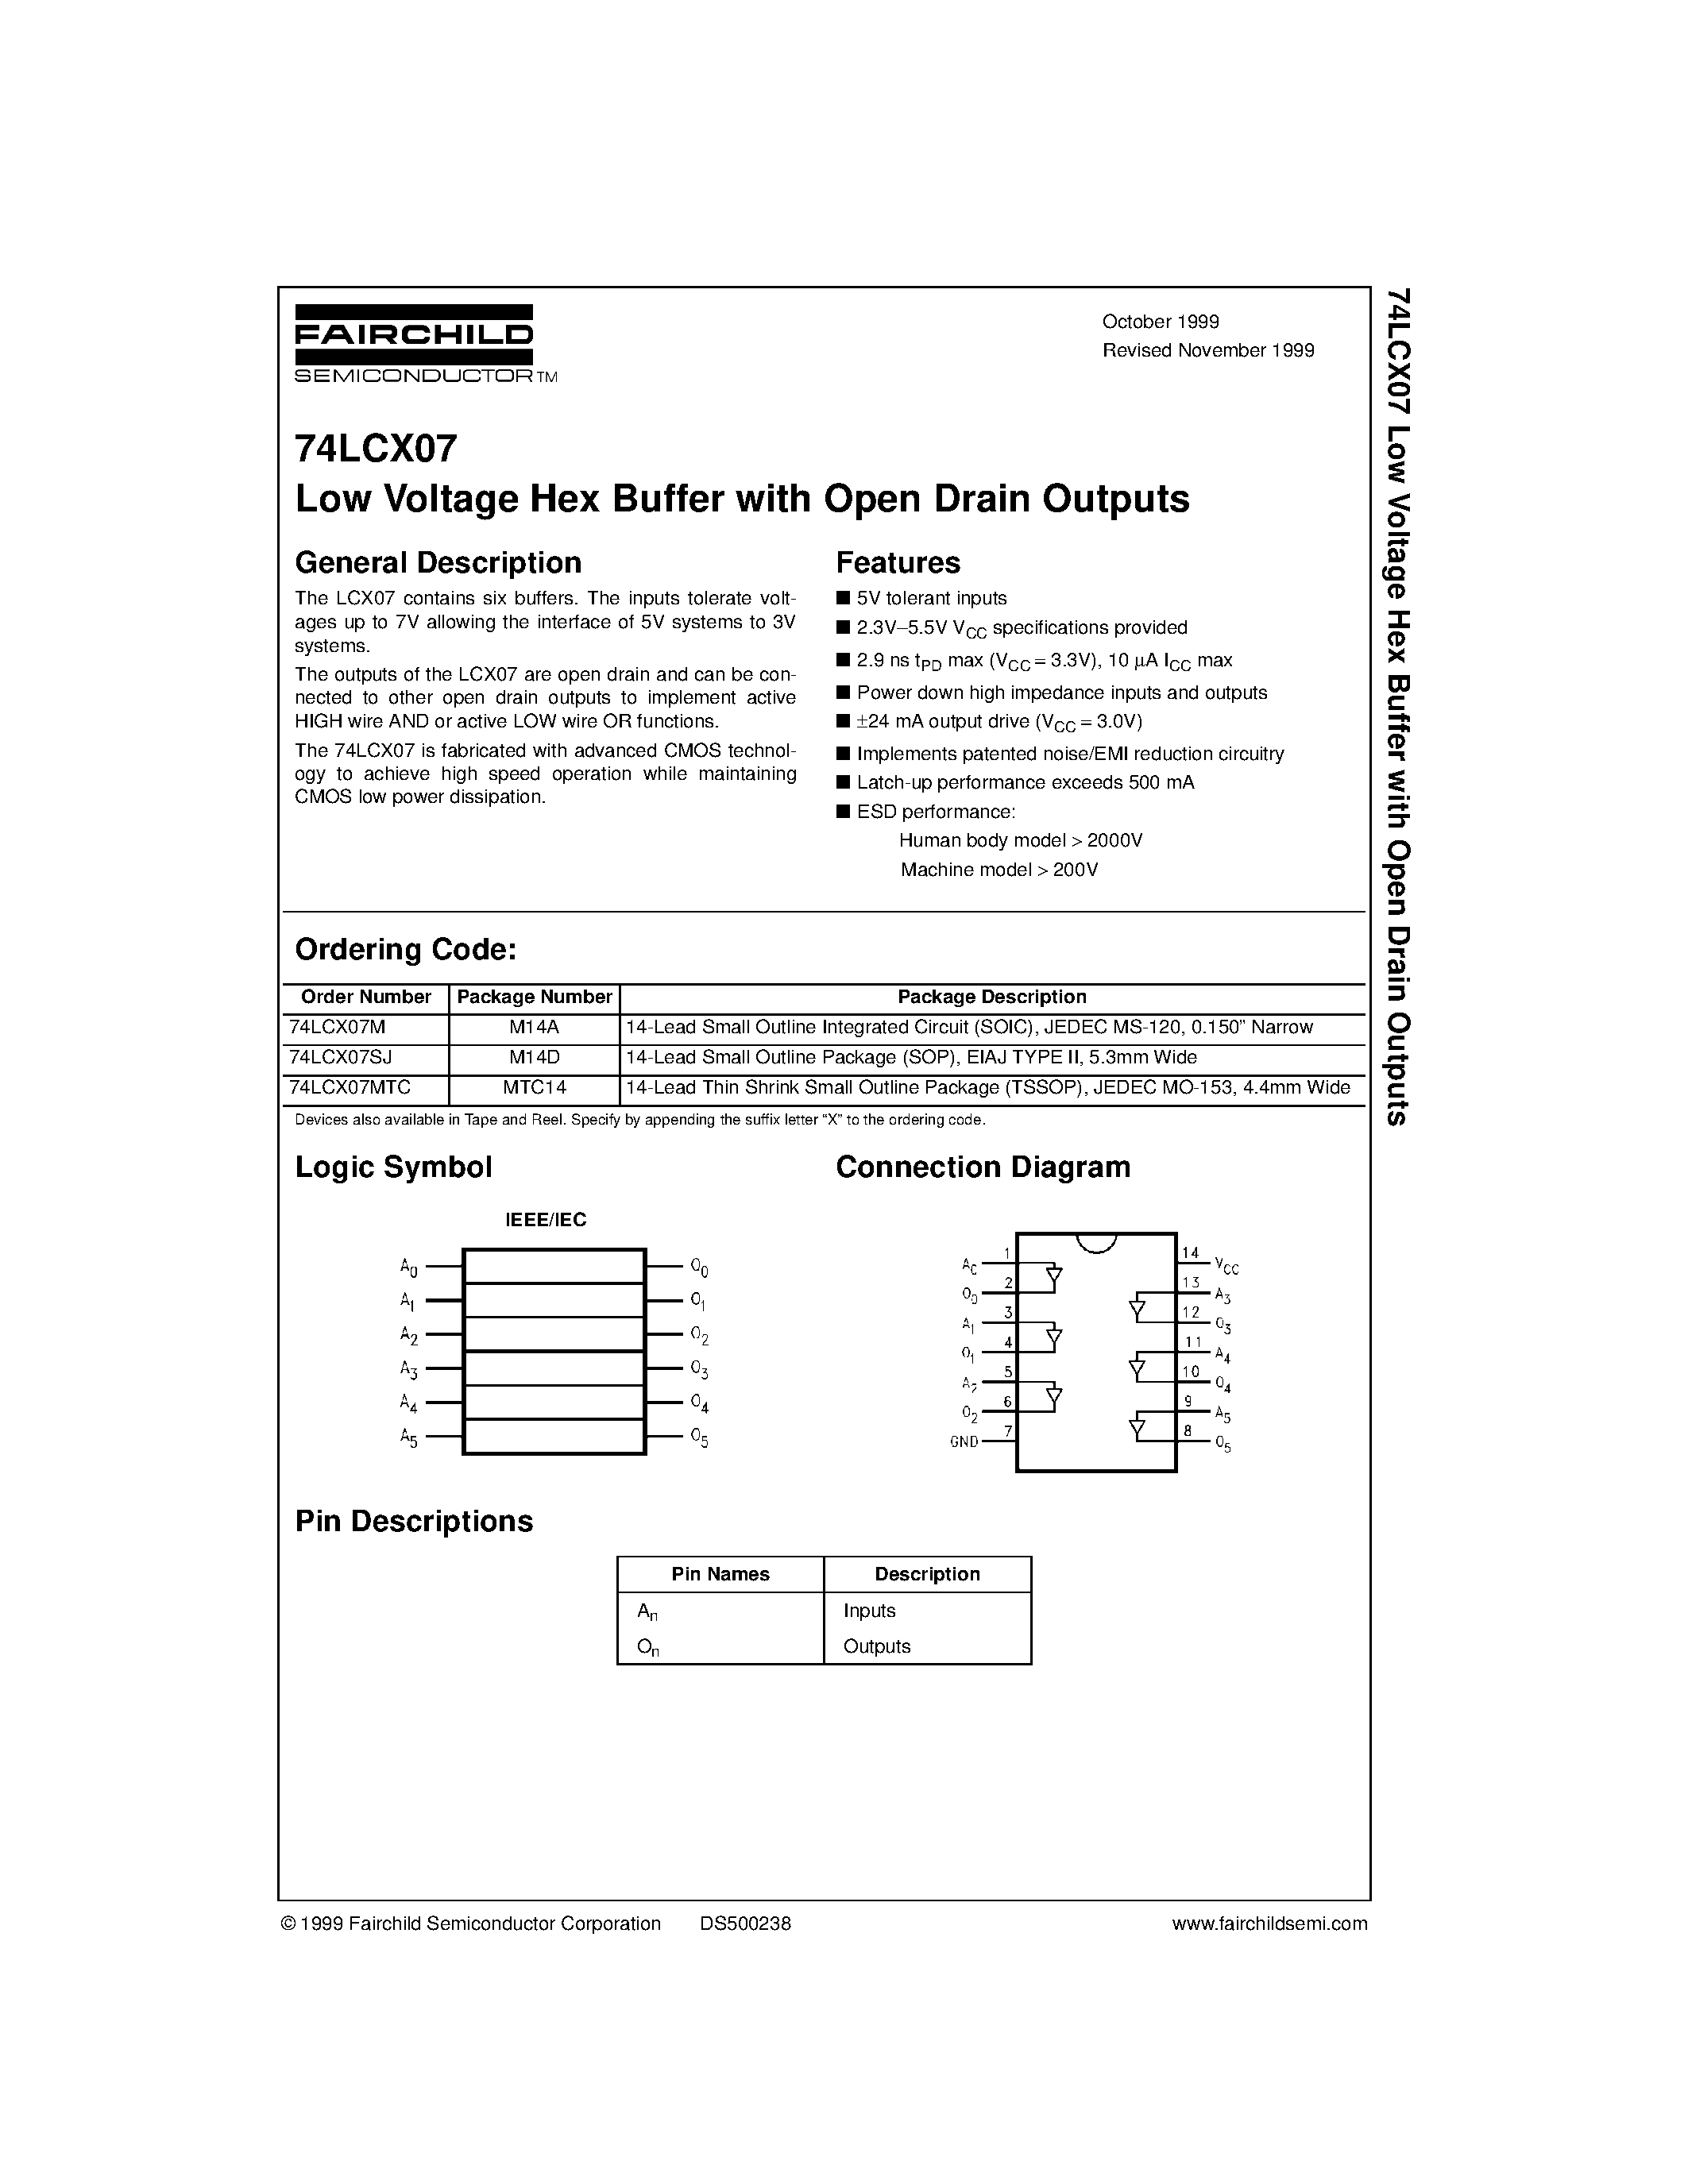 Datasheet 74LCX07MTC - Low Voltage Hex Buffer with Open Drain Outputs page 1